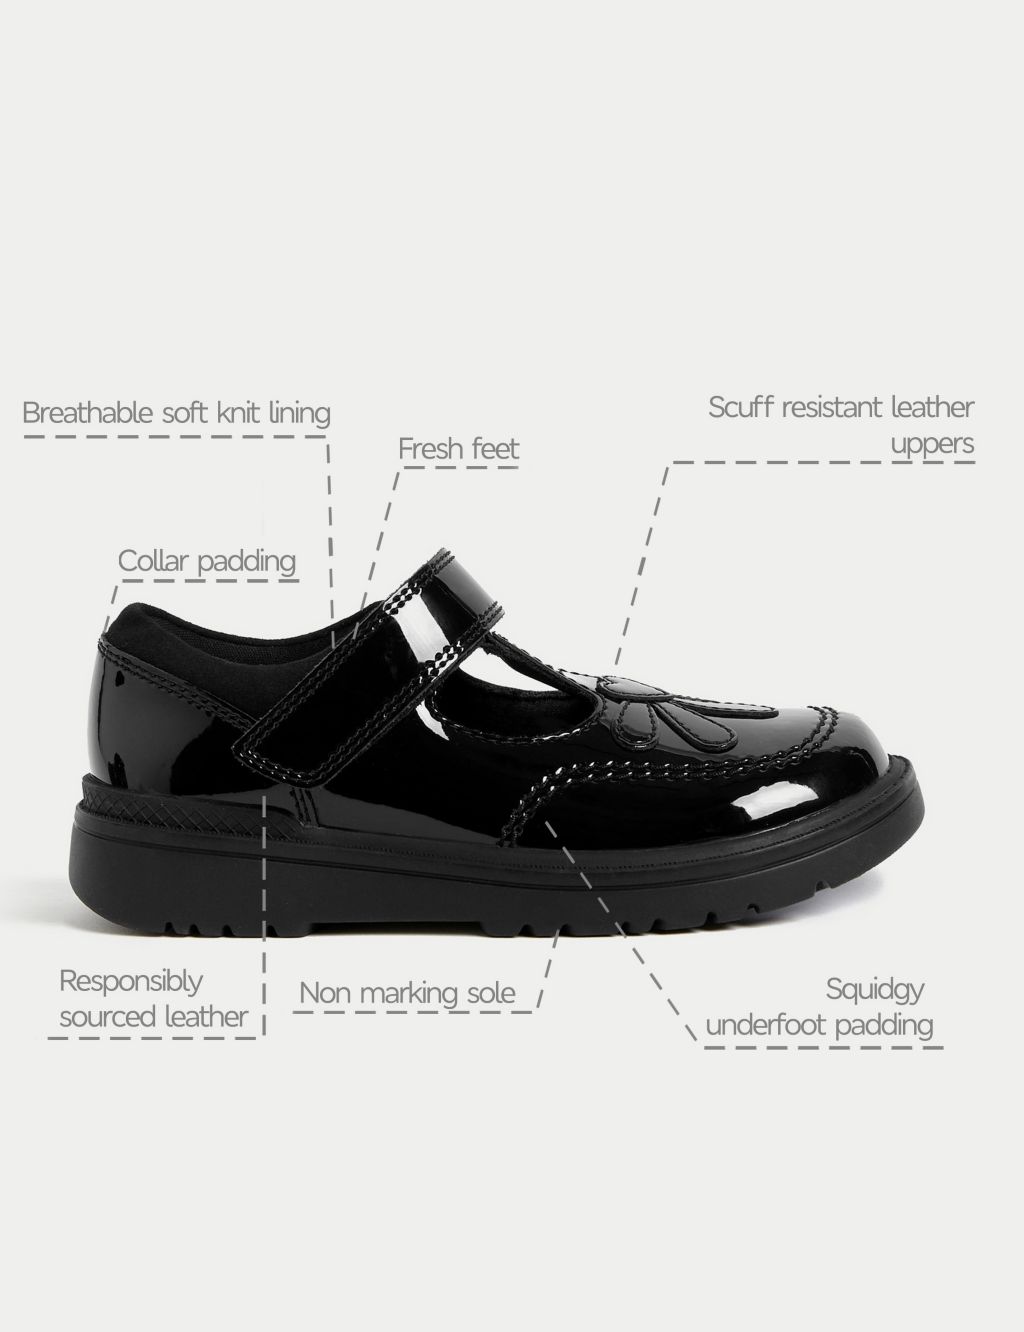 Kids' Patent Leather School Shoes (8 Small - 2 Large) image 5